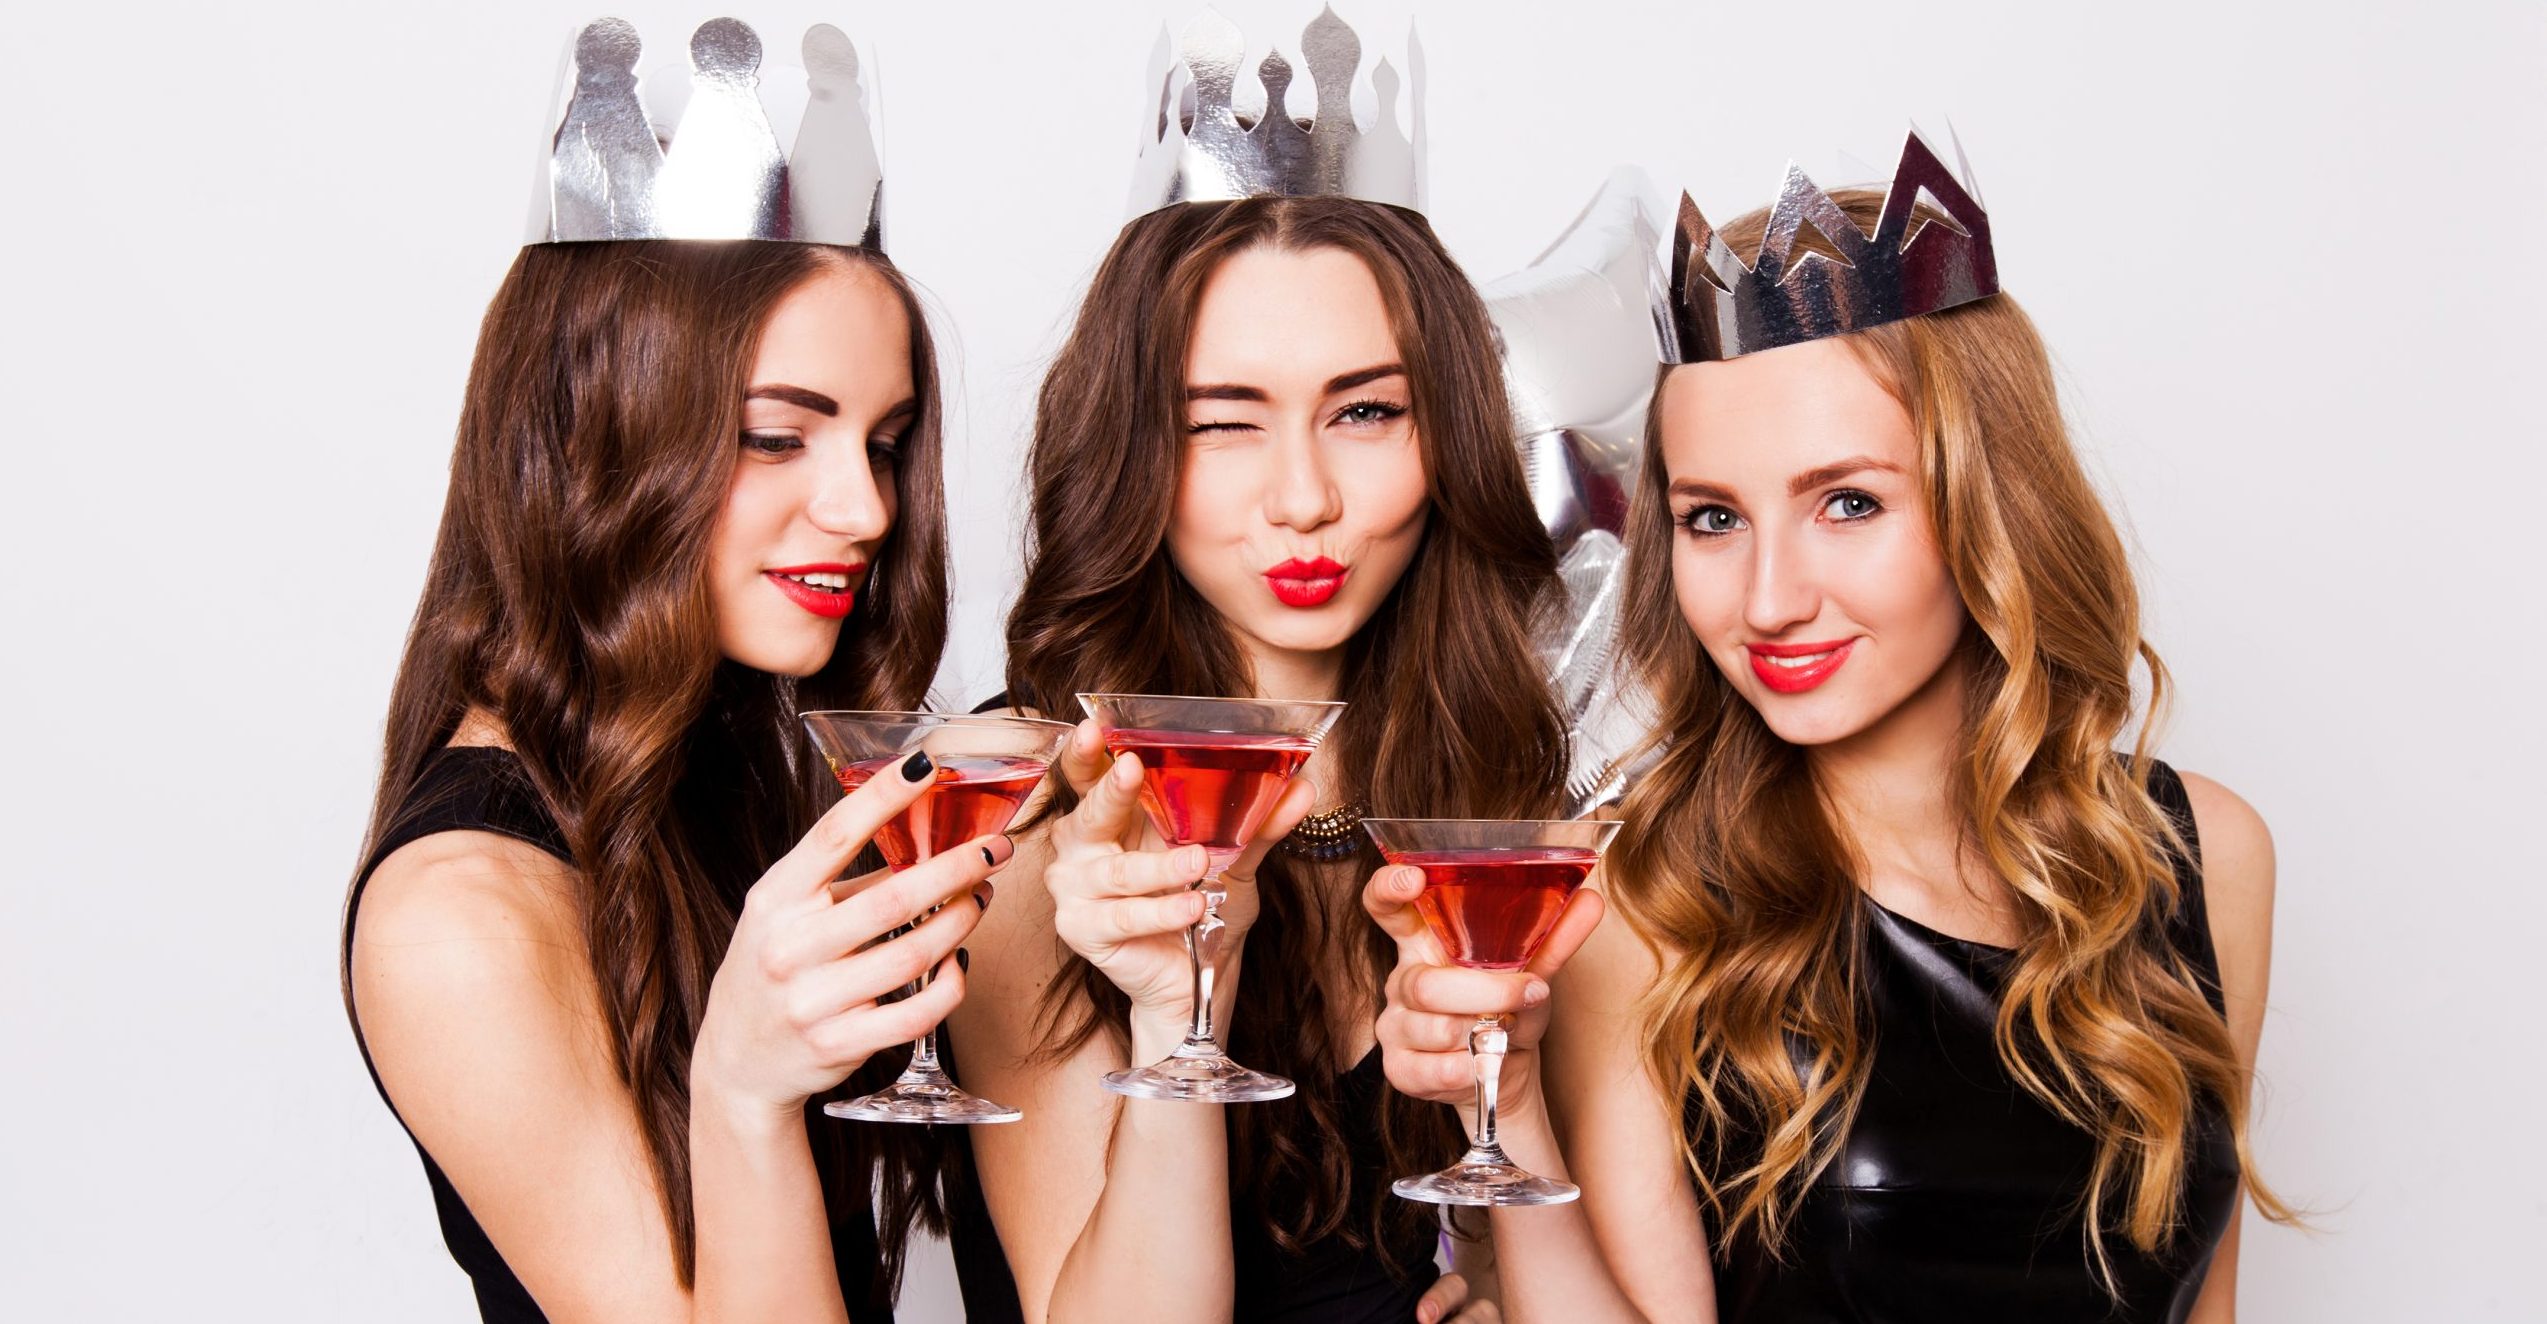 three-beautiful-elegant-women-celebrate-hen-party-and-drinking-cocktails-best-friends-wearing-black-evening-dress-crown-on-head-and-clink-glasses-bright-make-up-red-lips-inside